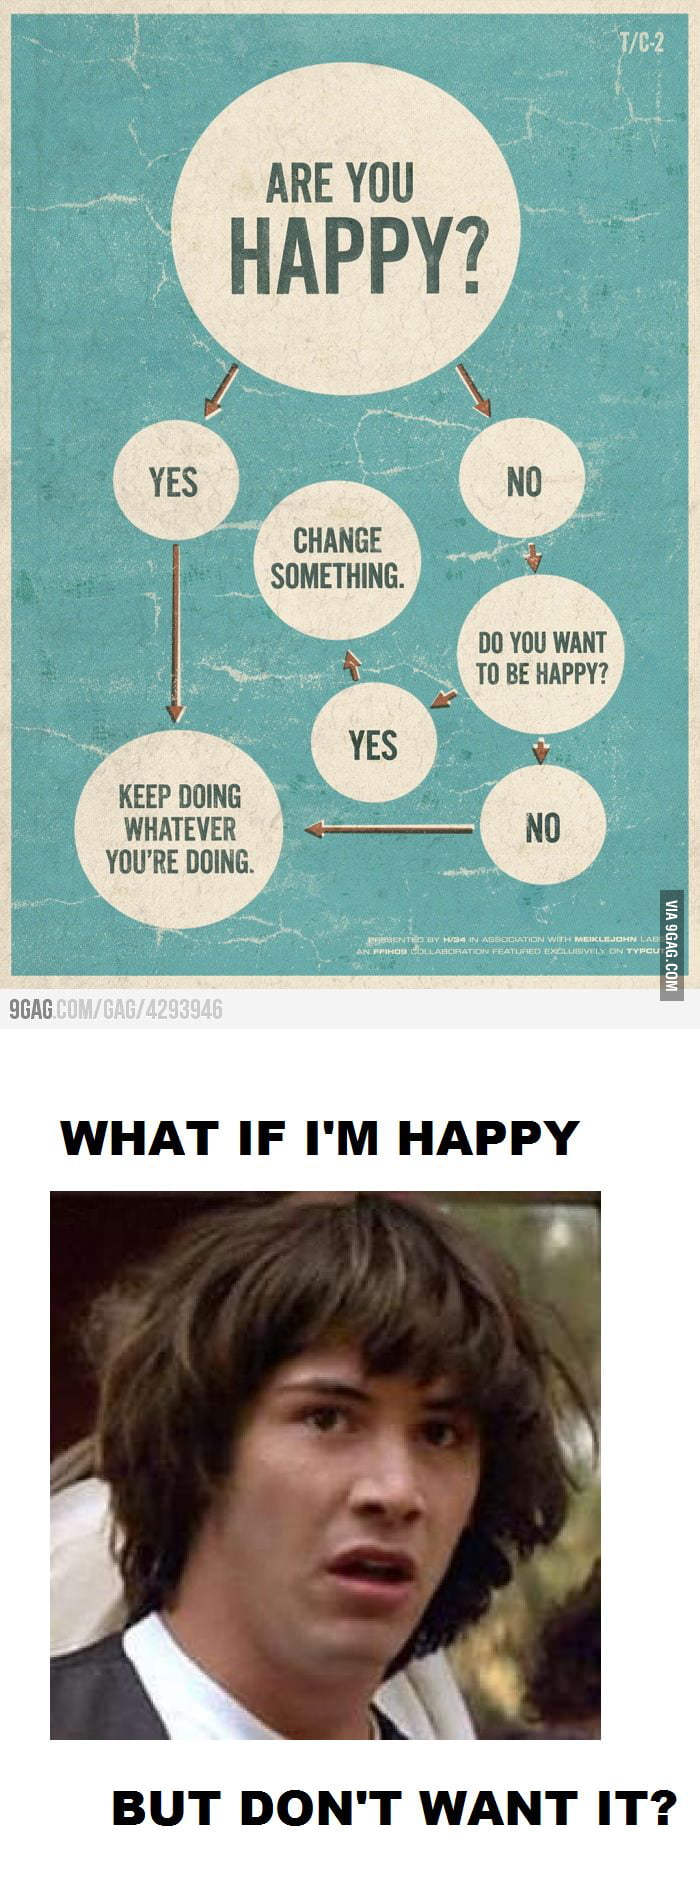 NOT for all unhappy people! 9GAG